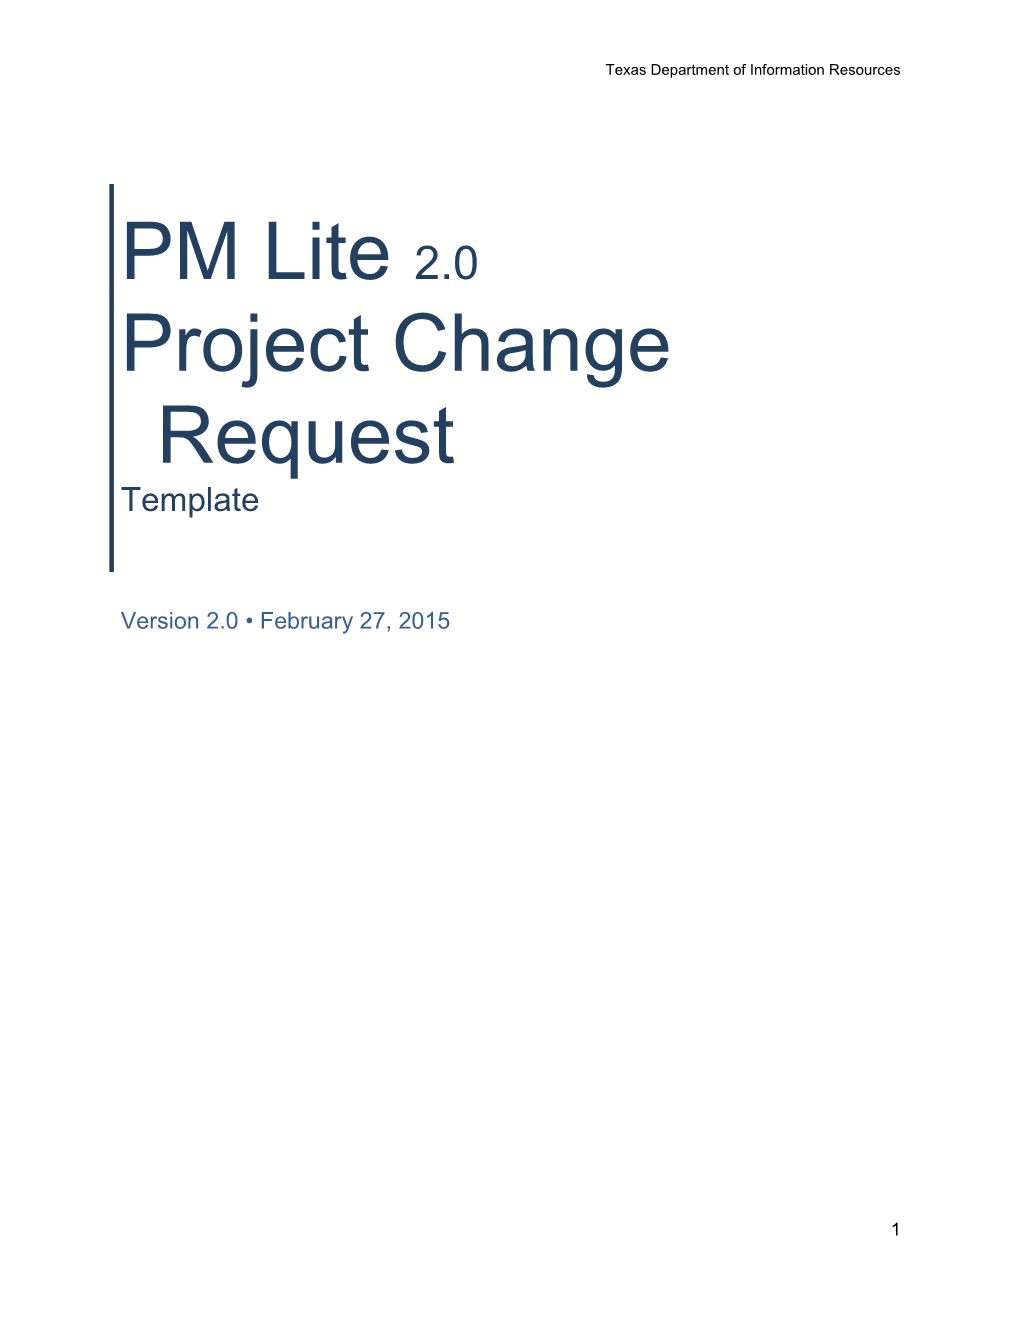 PM Lite Project Change Request Template 2.0